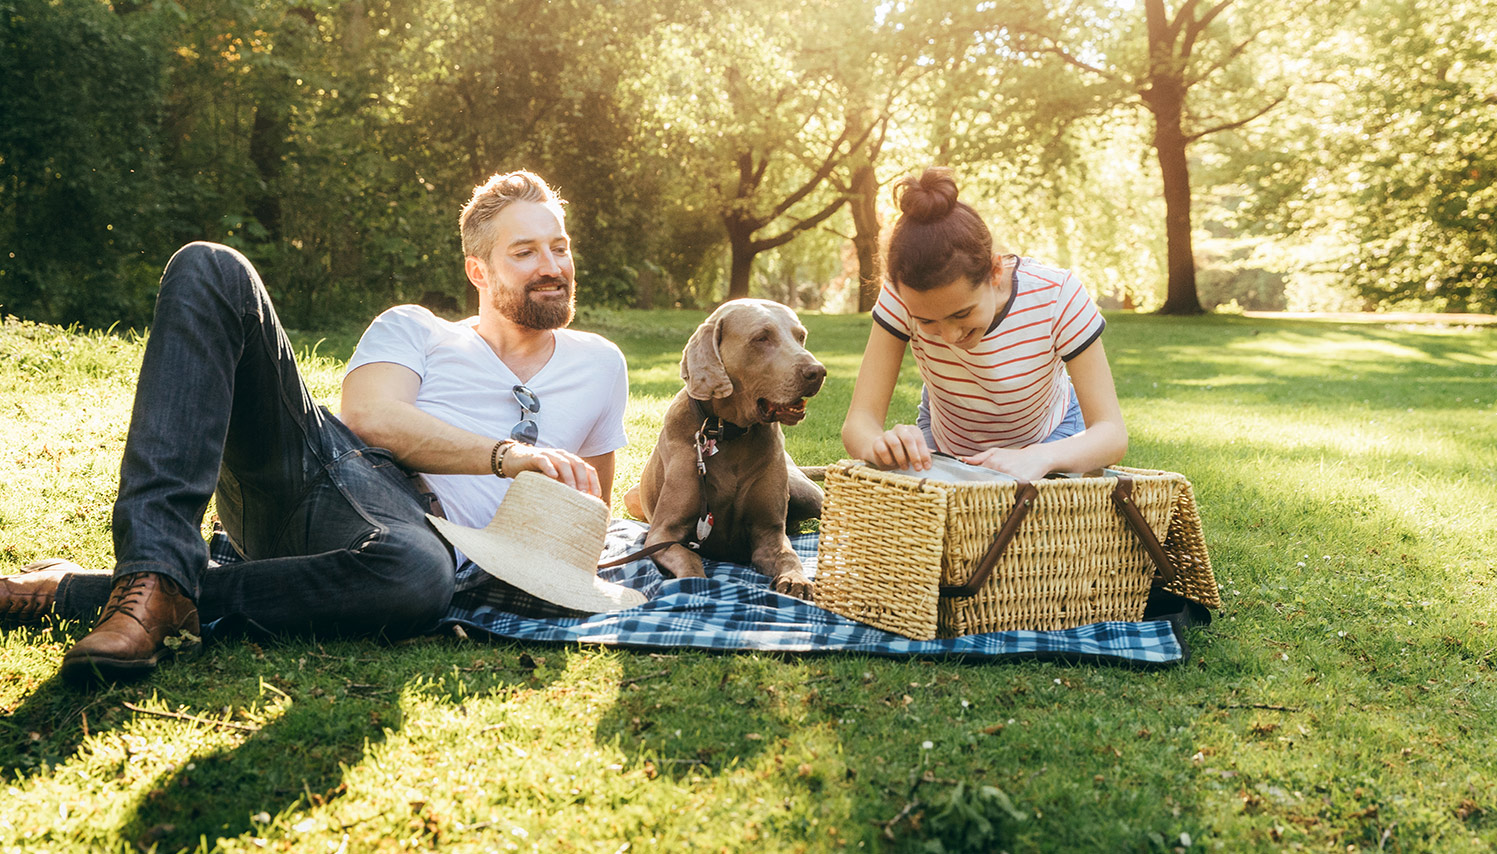 Father, Daughter, and Dog on a Picnic in a Park